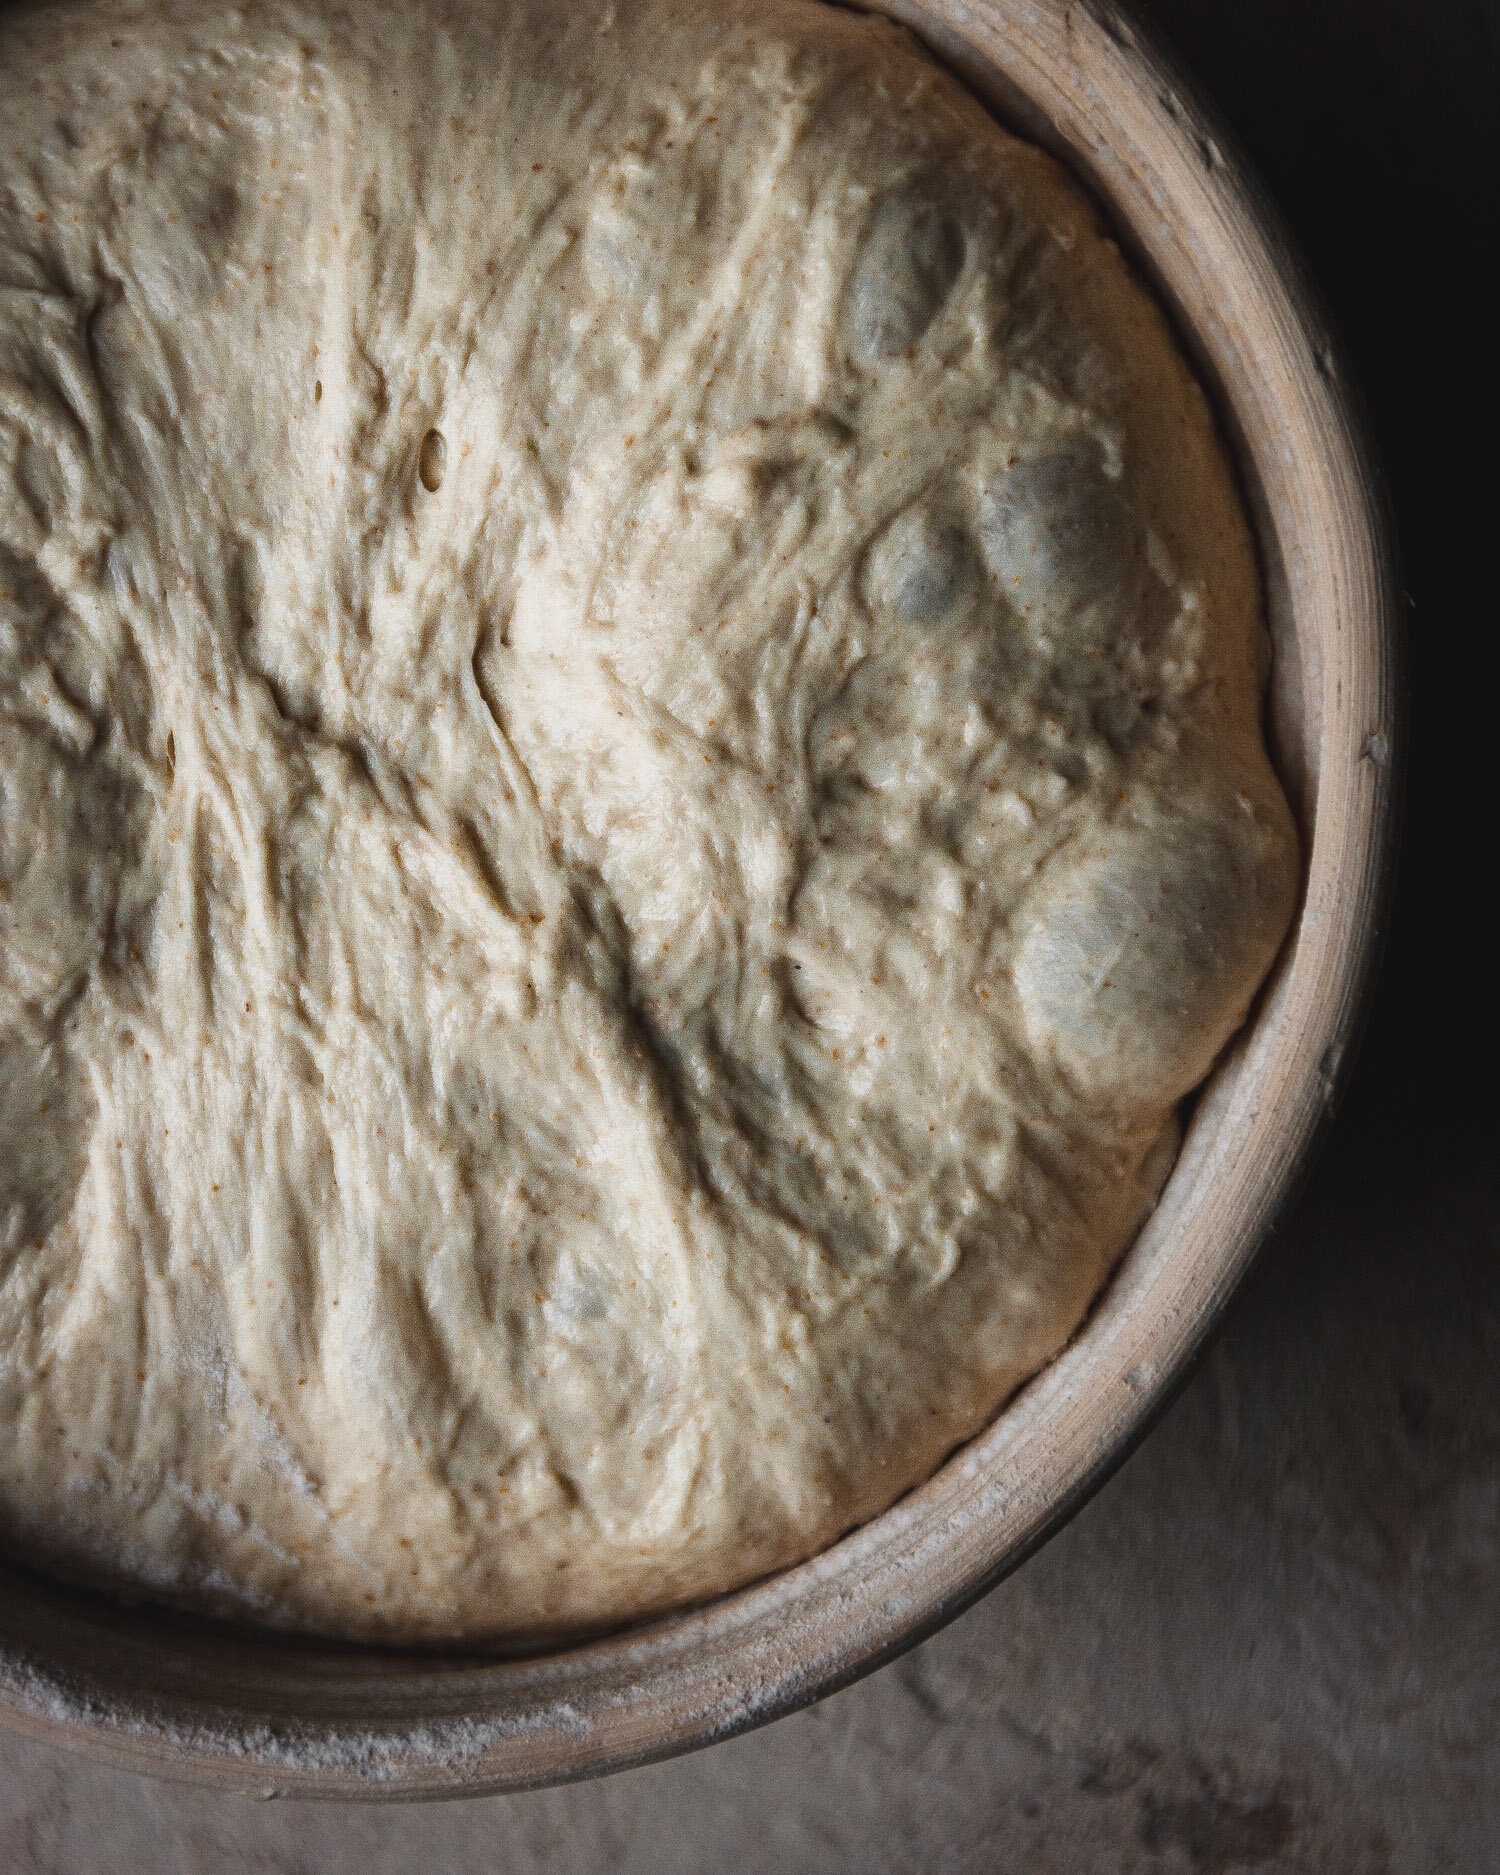 Sourdough Baking for Beginners – Place at the Table